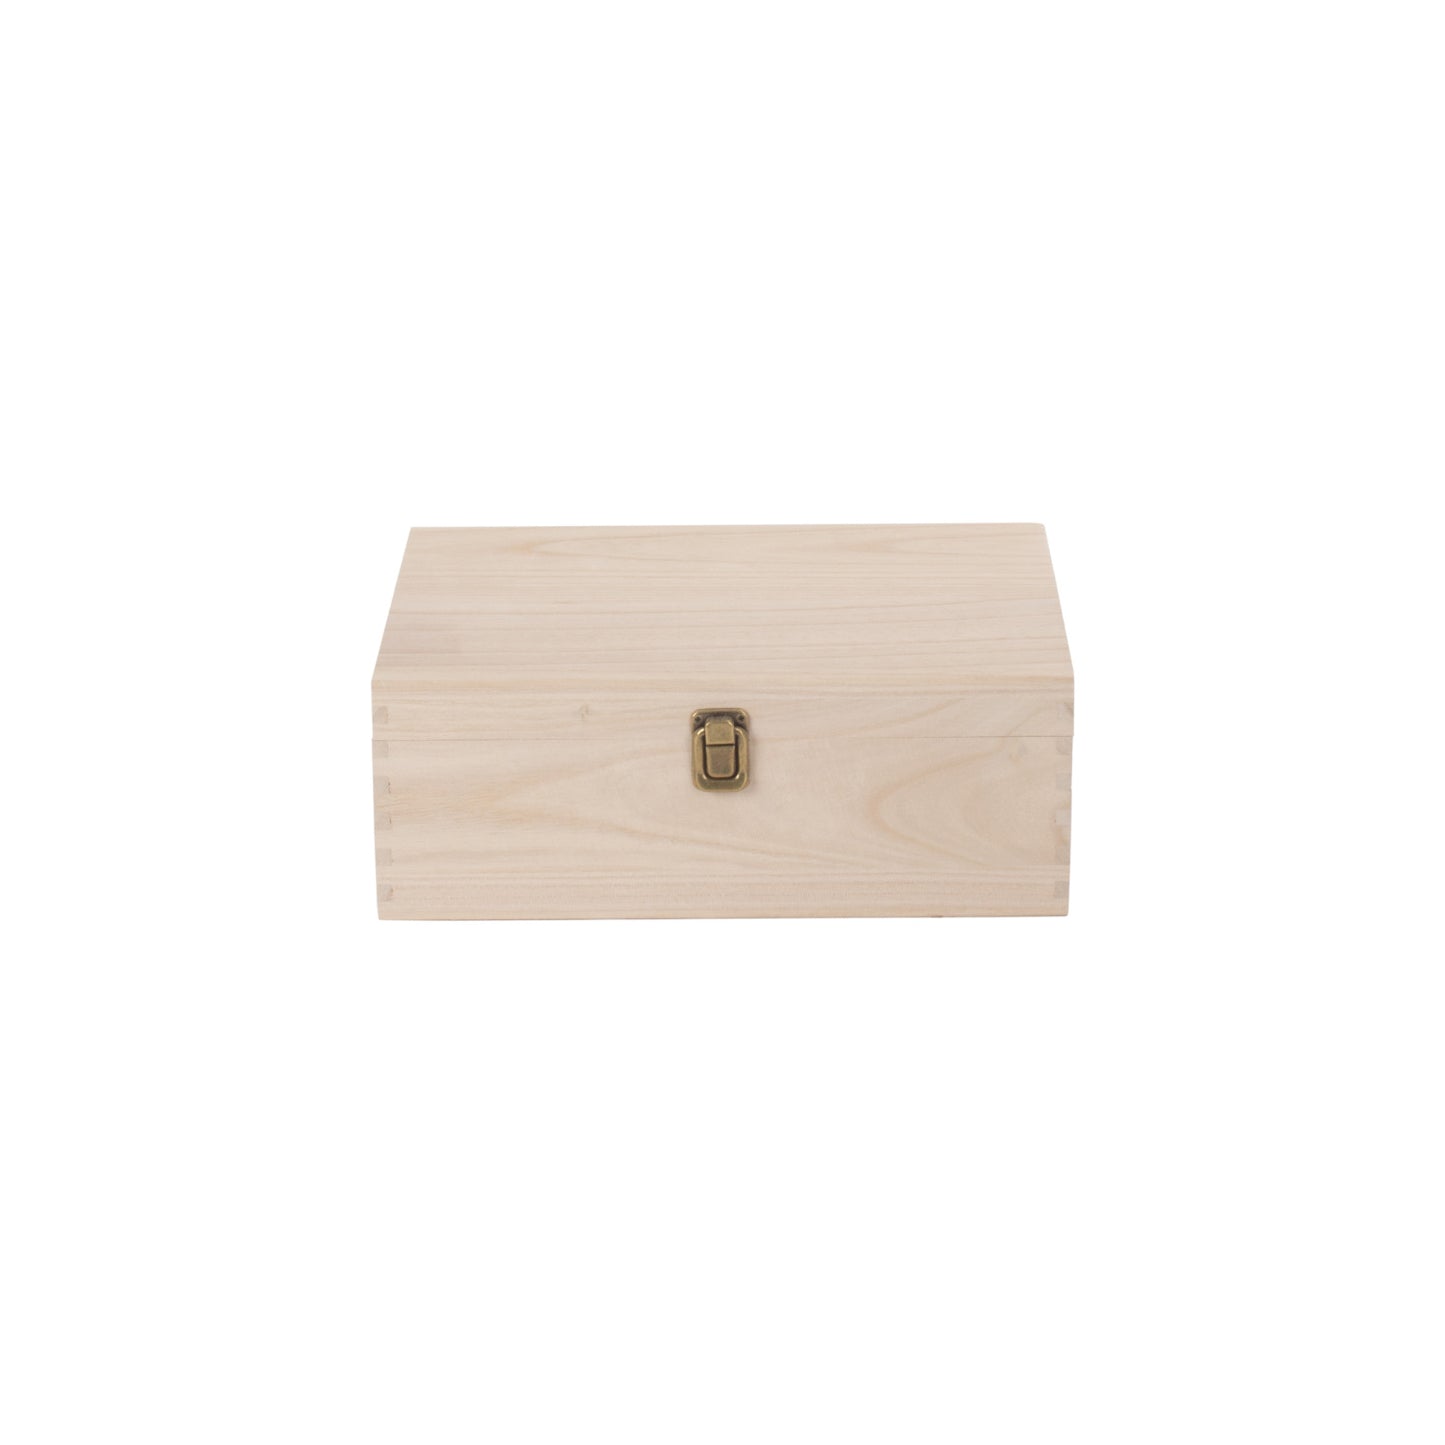 12 Inch Unvarnished Wooden Box